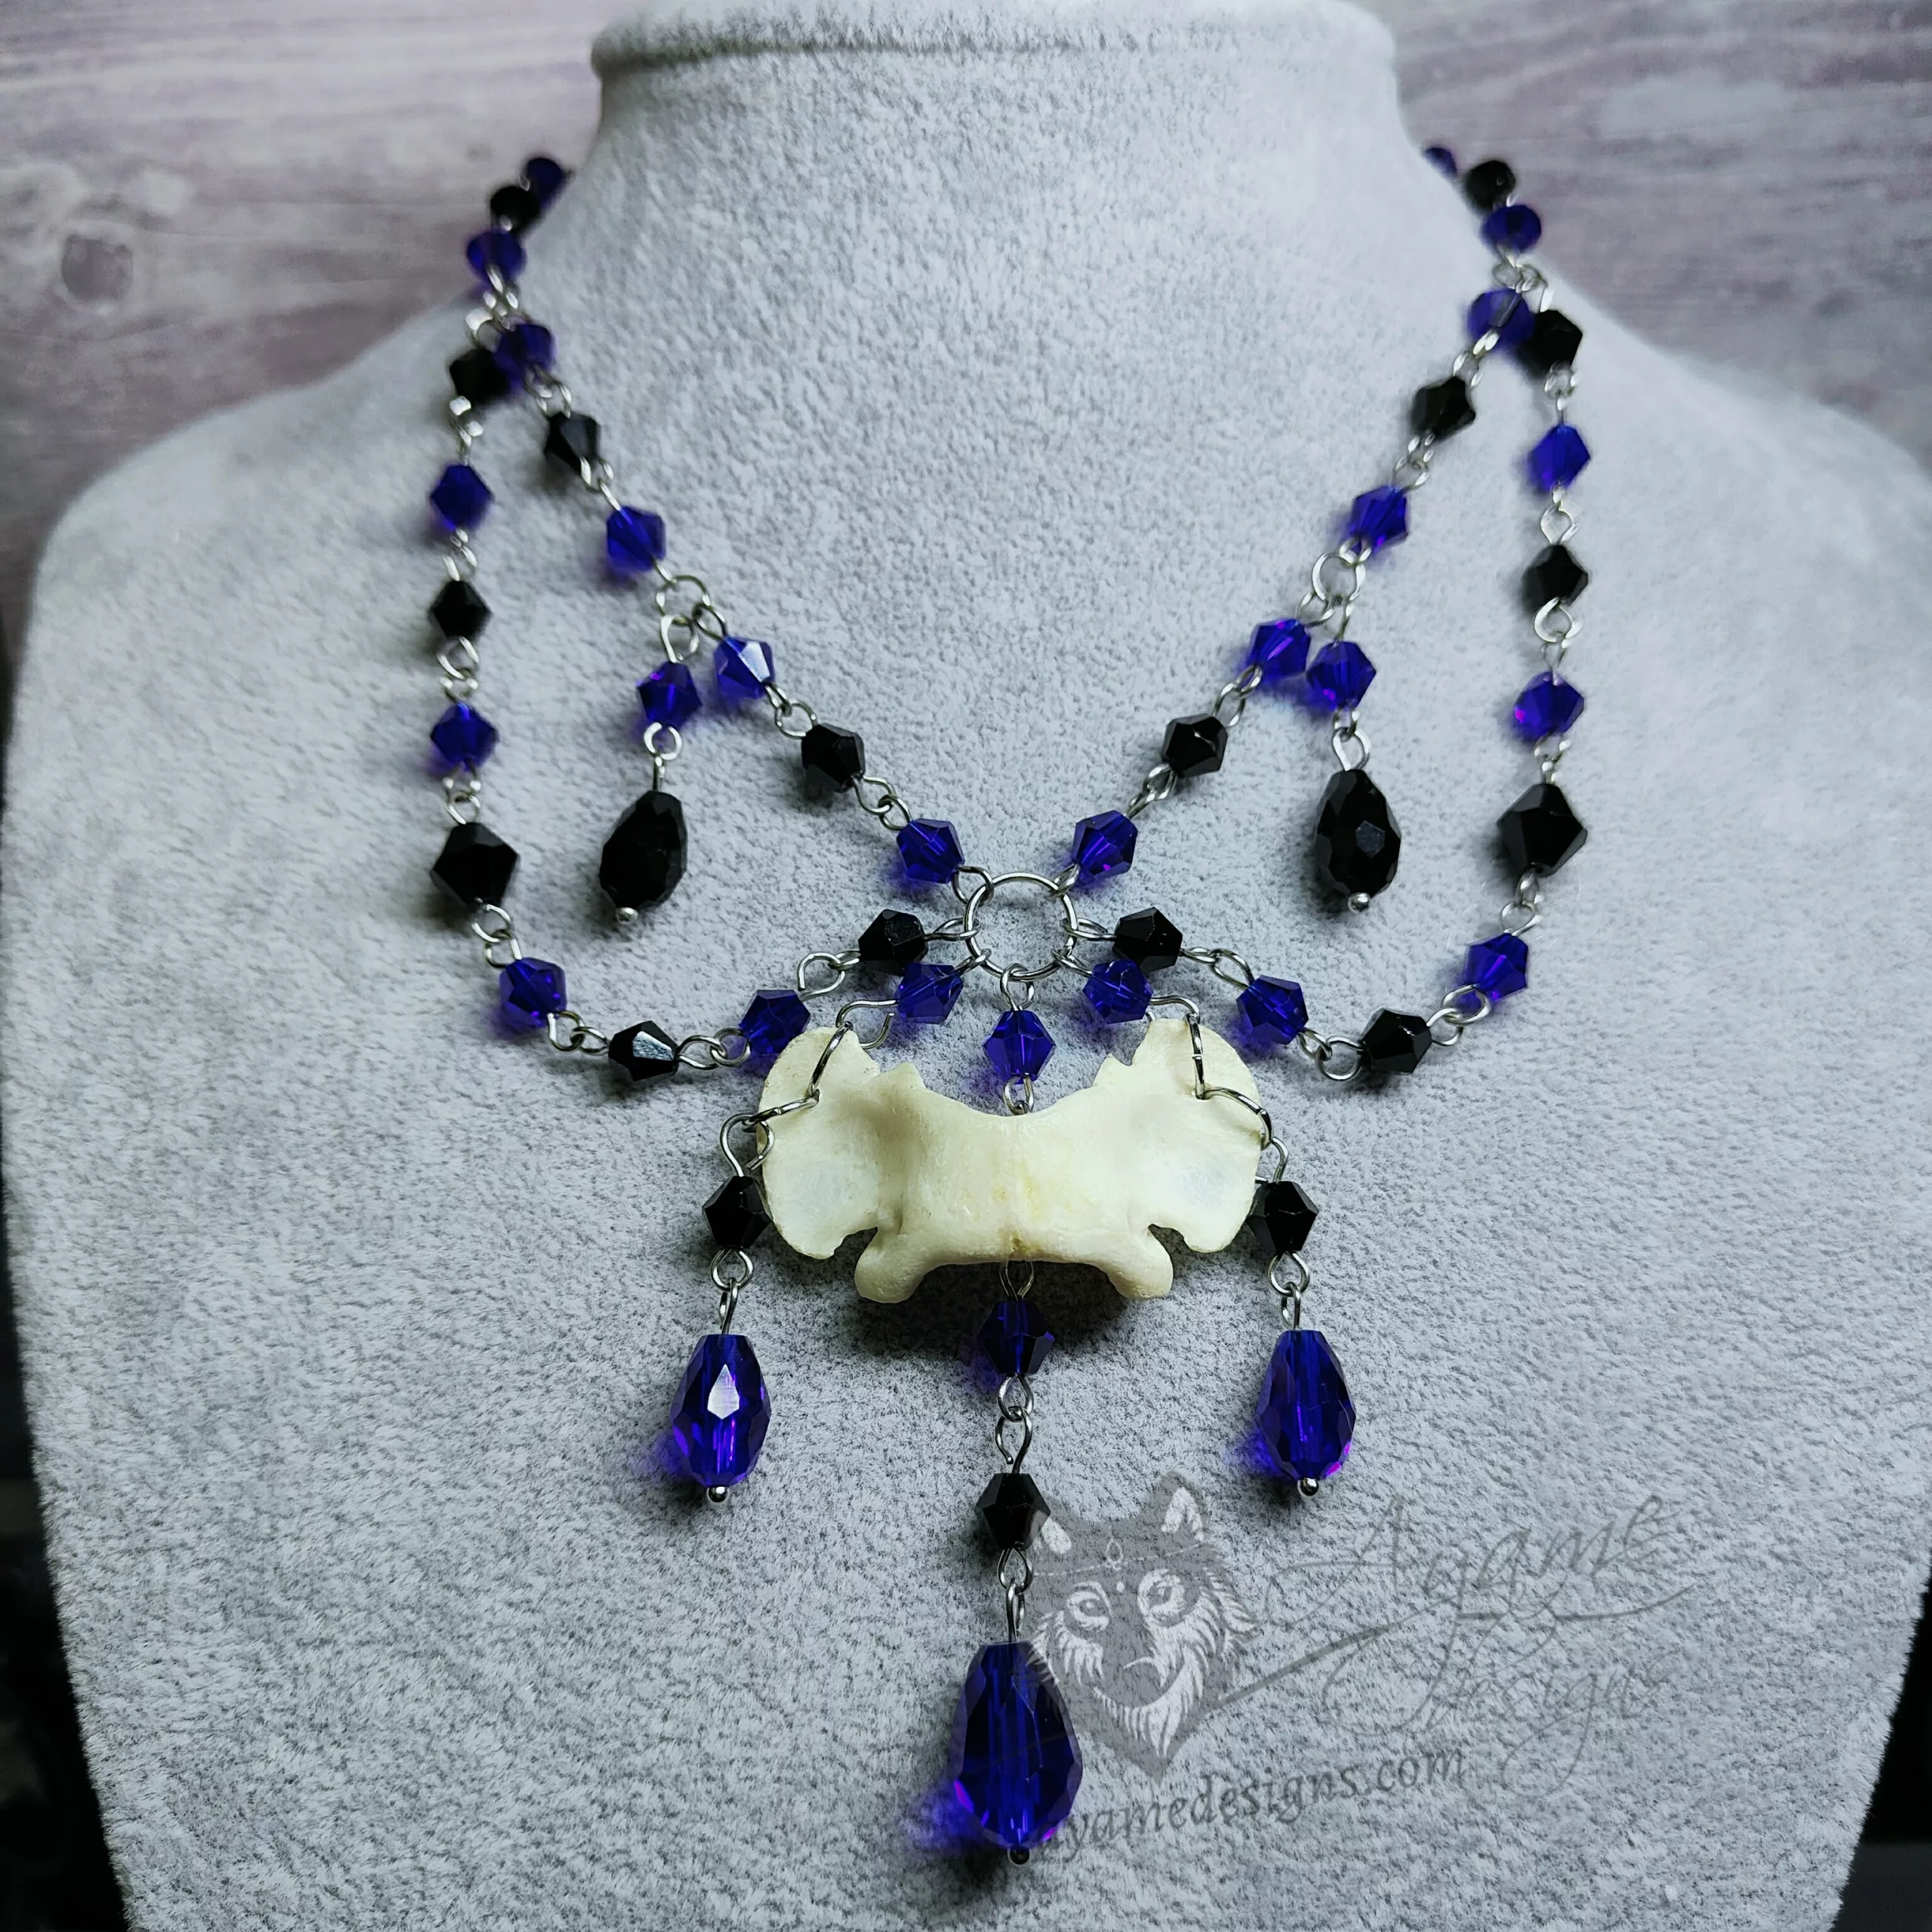 Handmade choker necklace with ethically sourced dog atlas bone, black and blue crystal beads and stainless steel